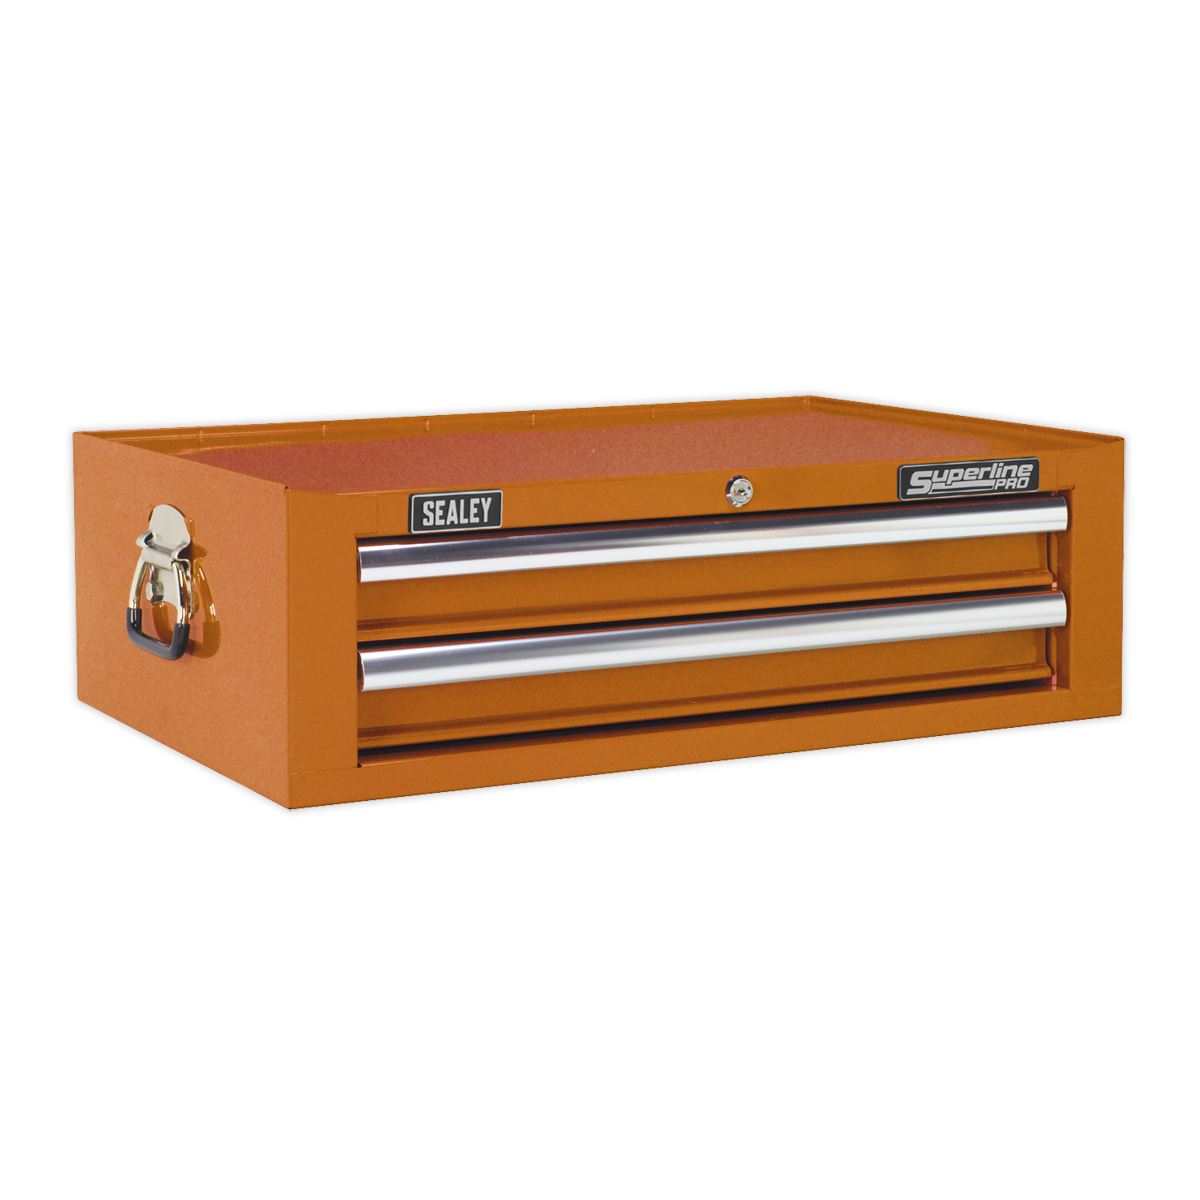 Sealey Superline Pro Mid-Box Tool Chest 2 Drawer with Ball-Bearing Slides - Orange